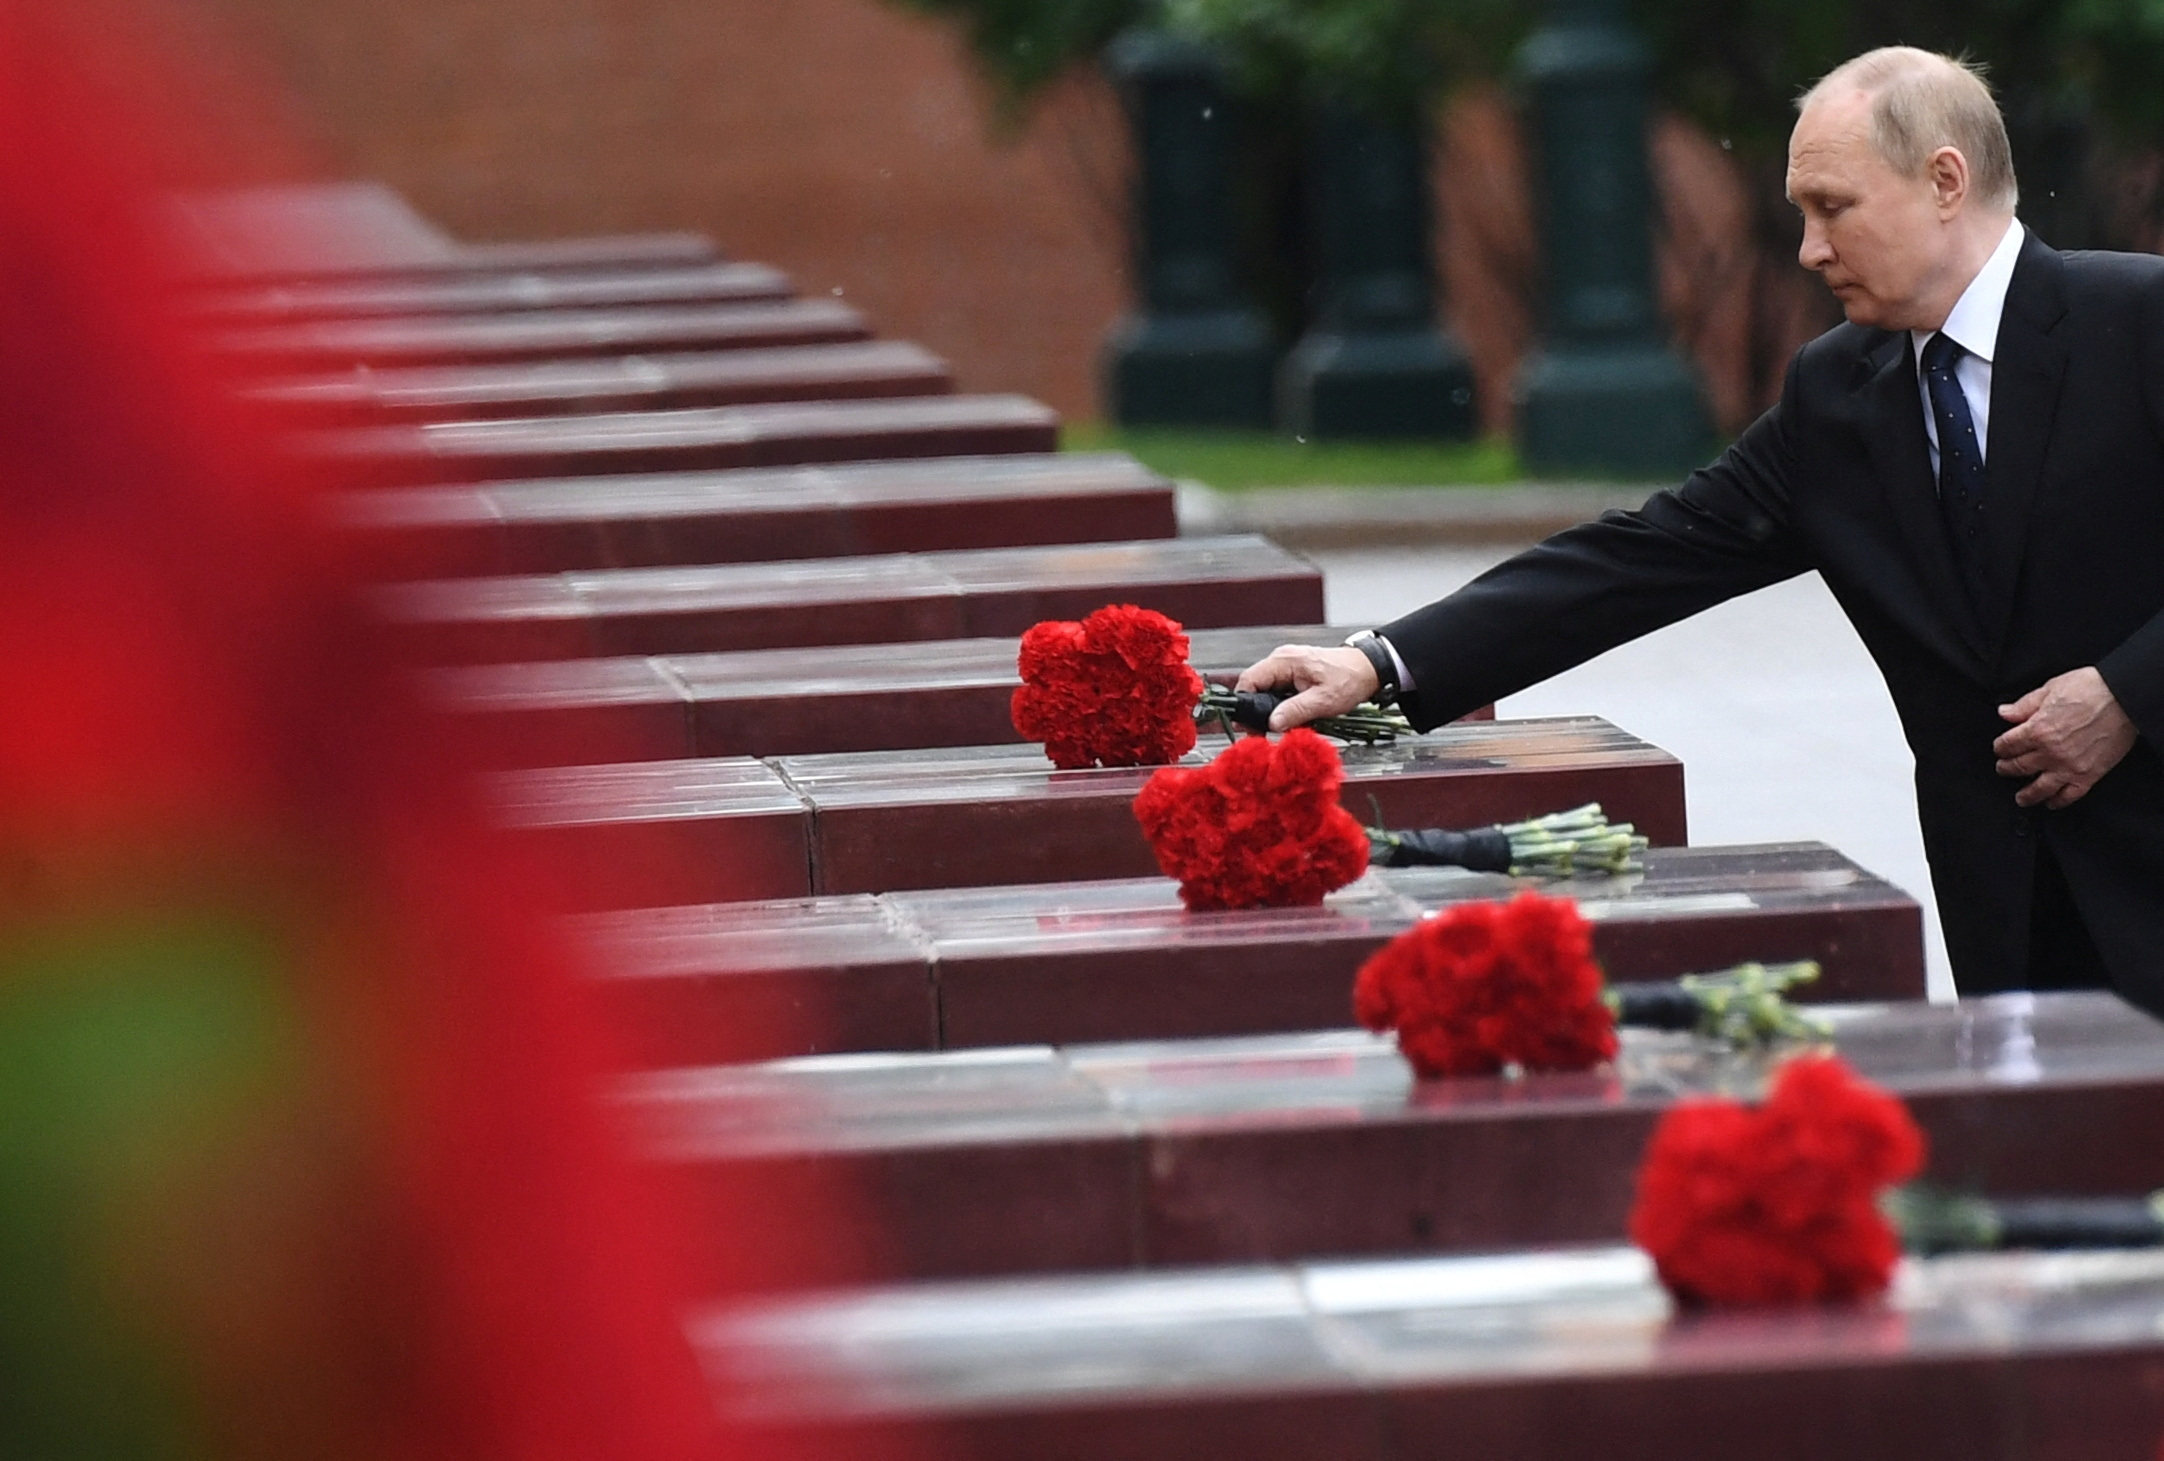 Russian President Vladimir Putin lays flowers at a memorial to the Hero Cities during a ceremony to mark the anniversary of the beginning of the so-called Great Patriotic War against Nazi Germany in 1941, in central Moscow, Russia, on June 22. Photo: Sputnik / Kremlin via Reuters